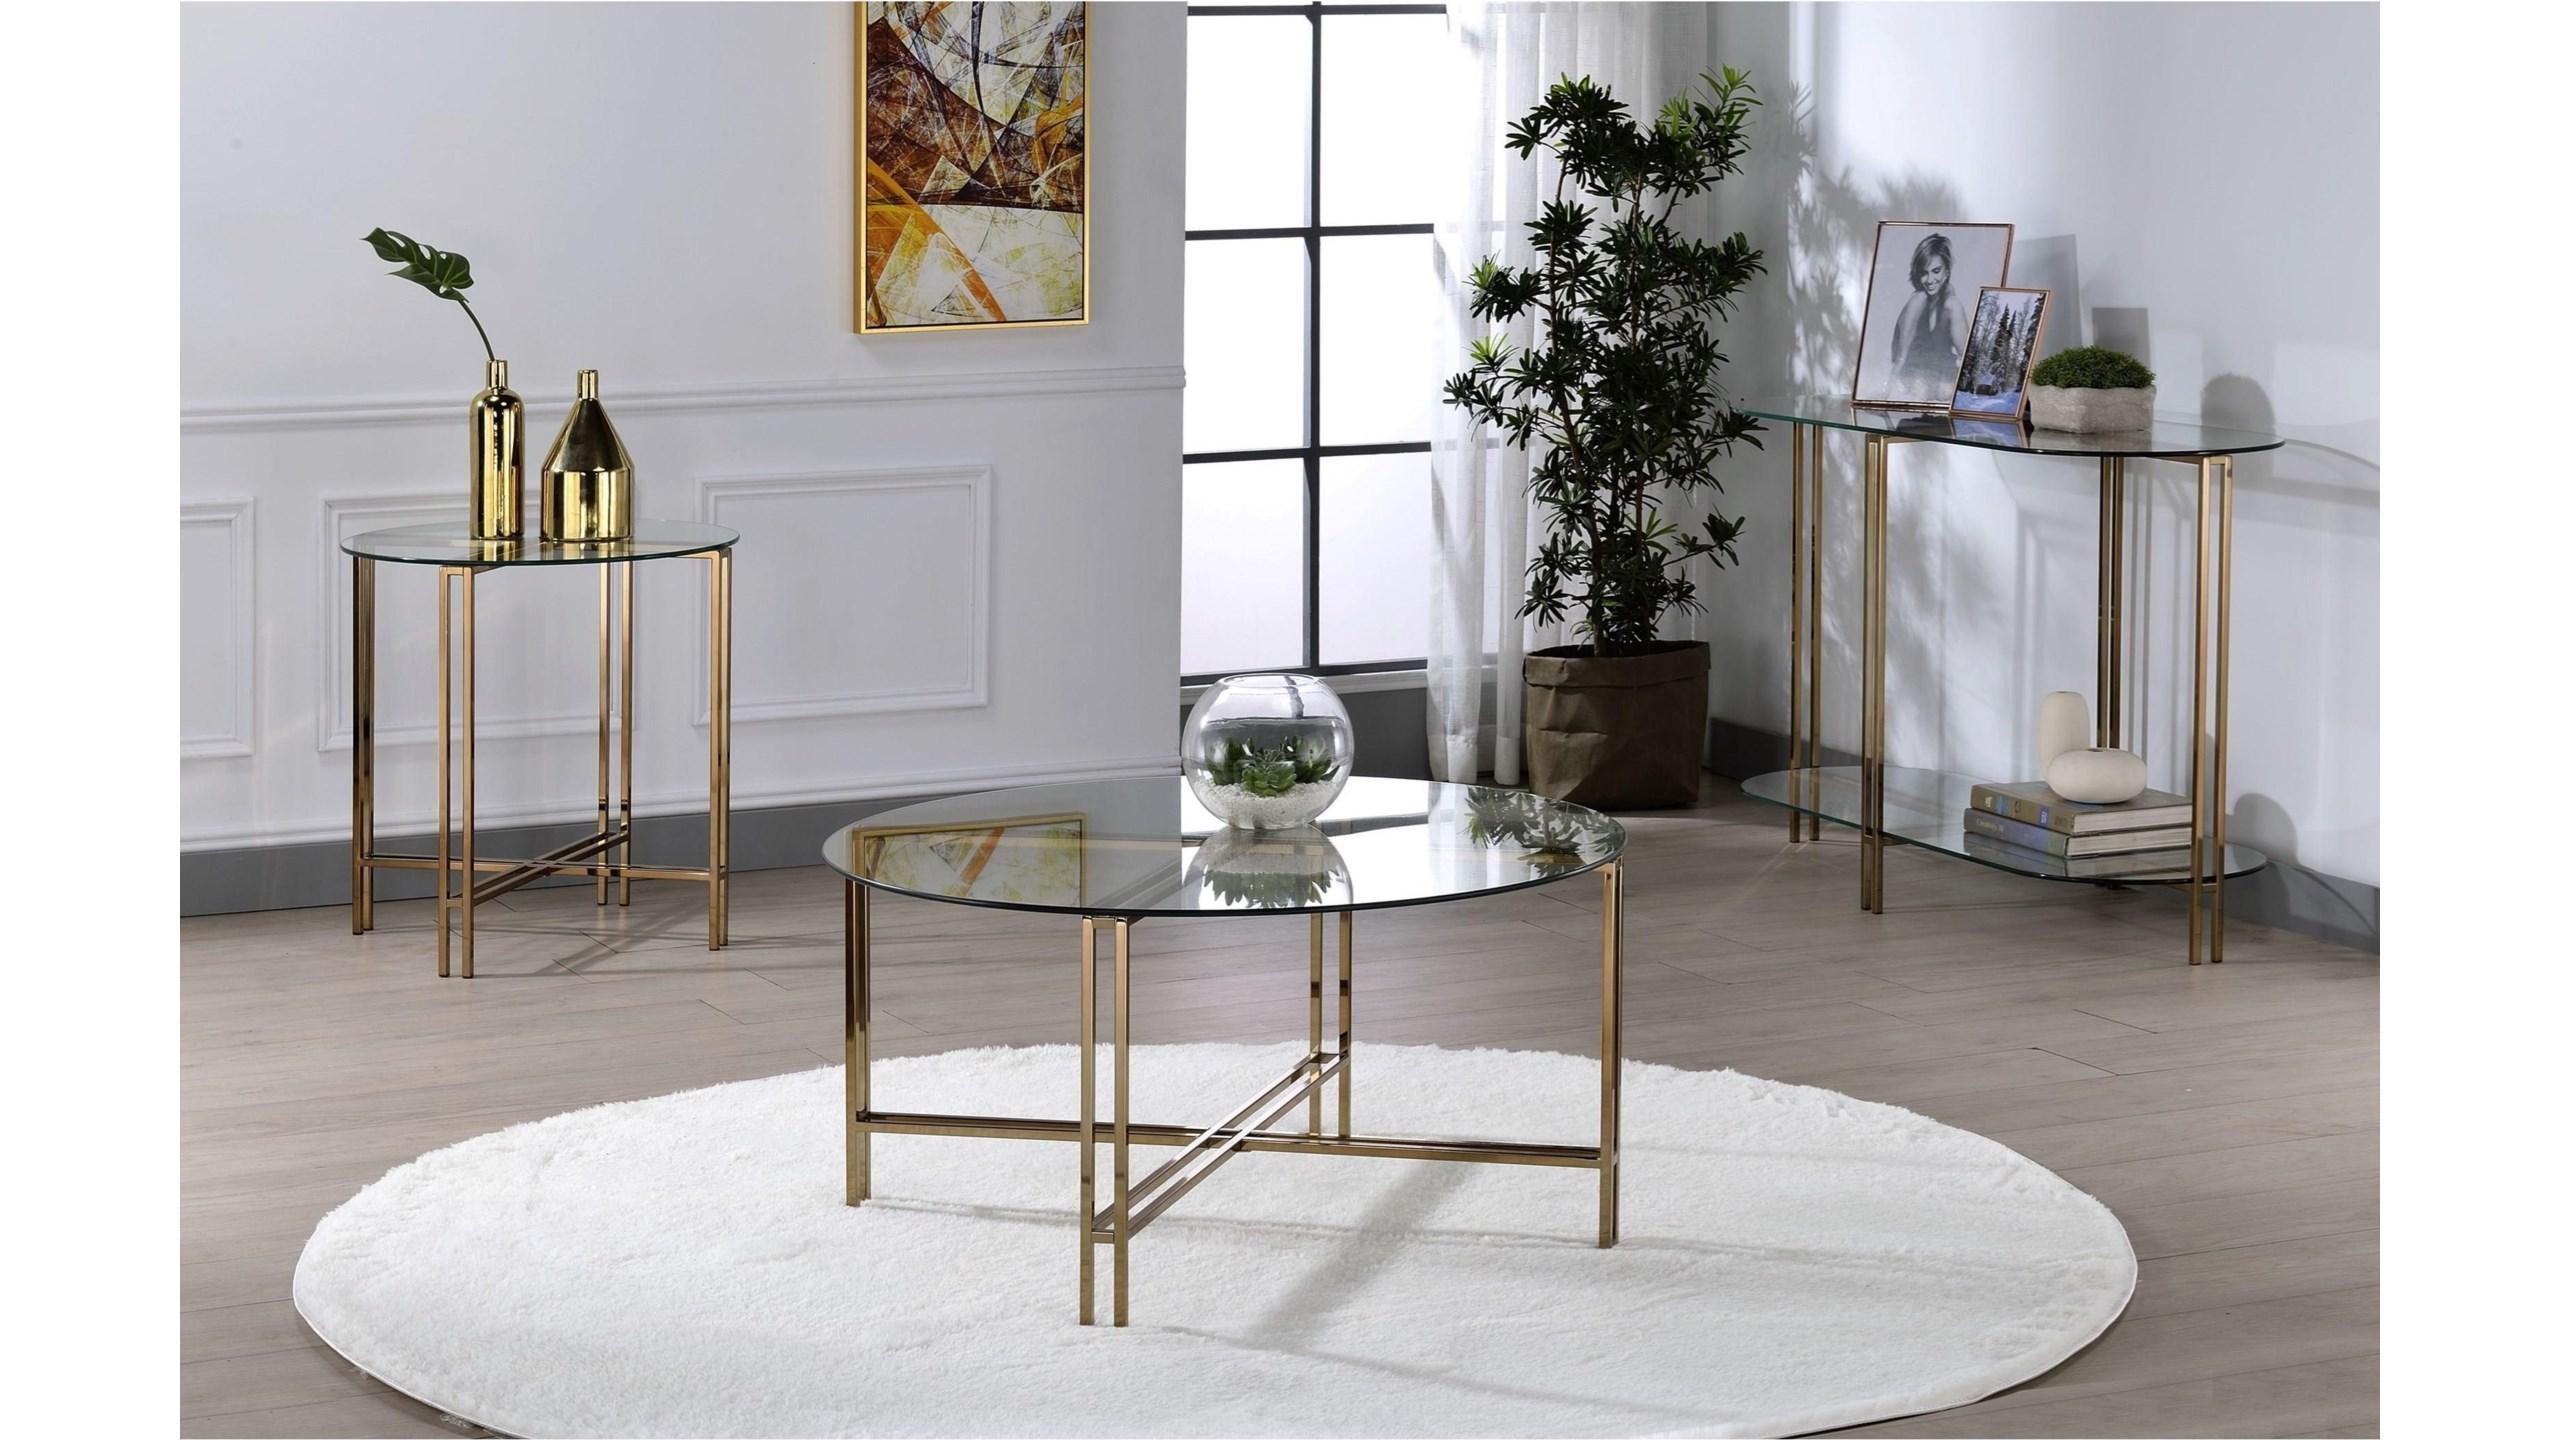 

    
Contemporary Champagne Coffee Table + End Table + Sofa Table by Acme Veises 82995-3pcs
